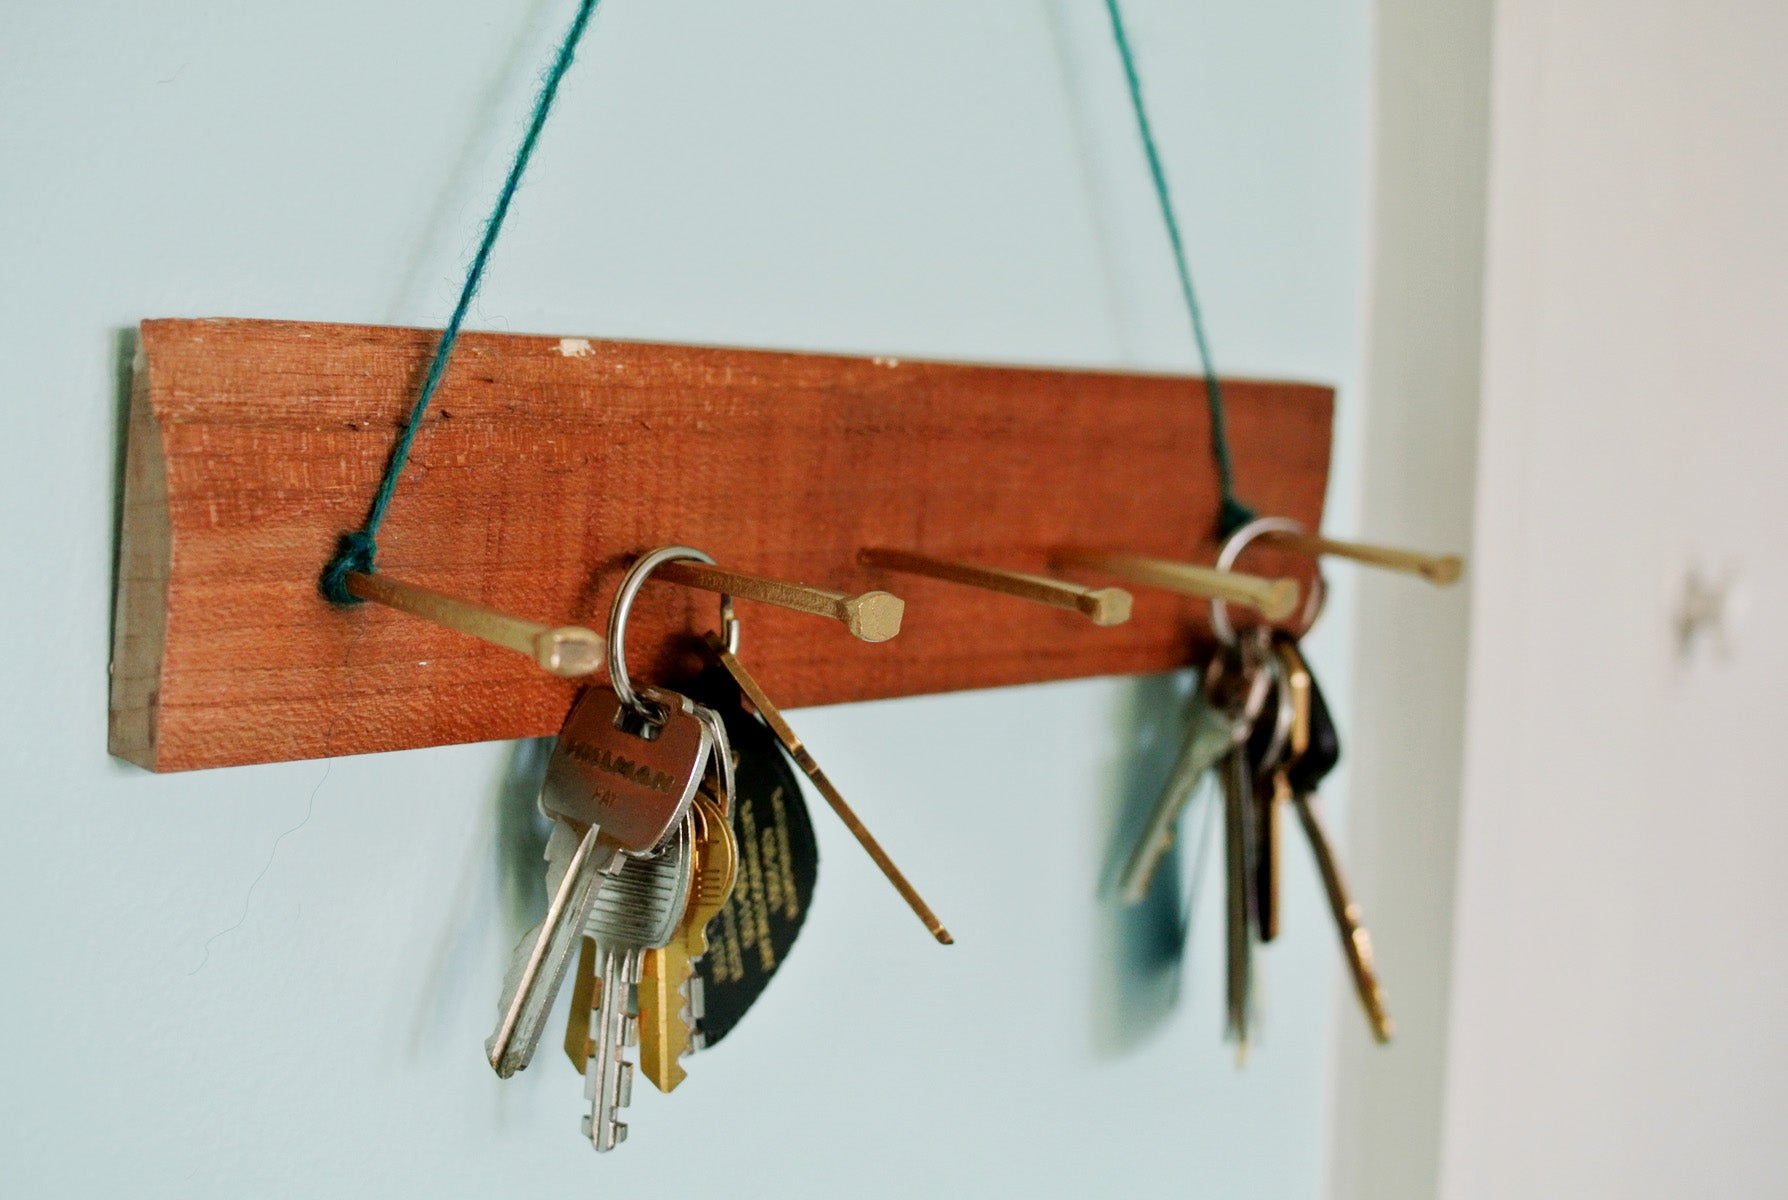 Looking for a stylish place to hook your keys? Tired of boring store-bought key racks? Create this easy rack for your keys in just a few minutes and just a few dollars with a few materials you may have already laying around the house!